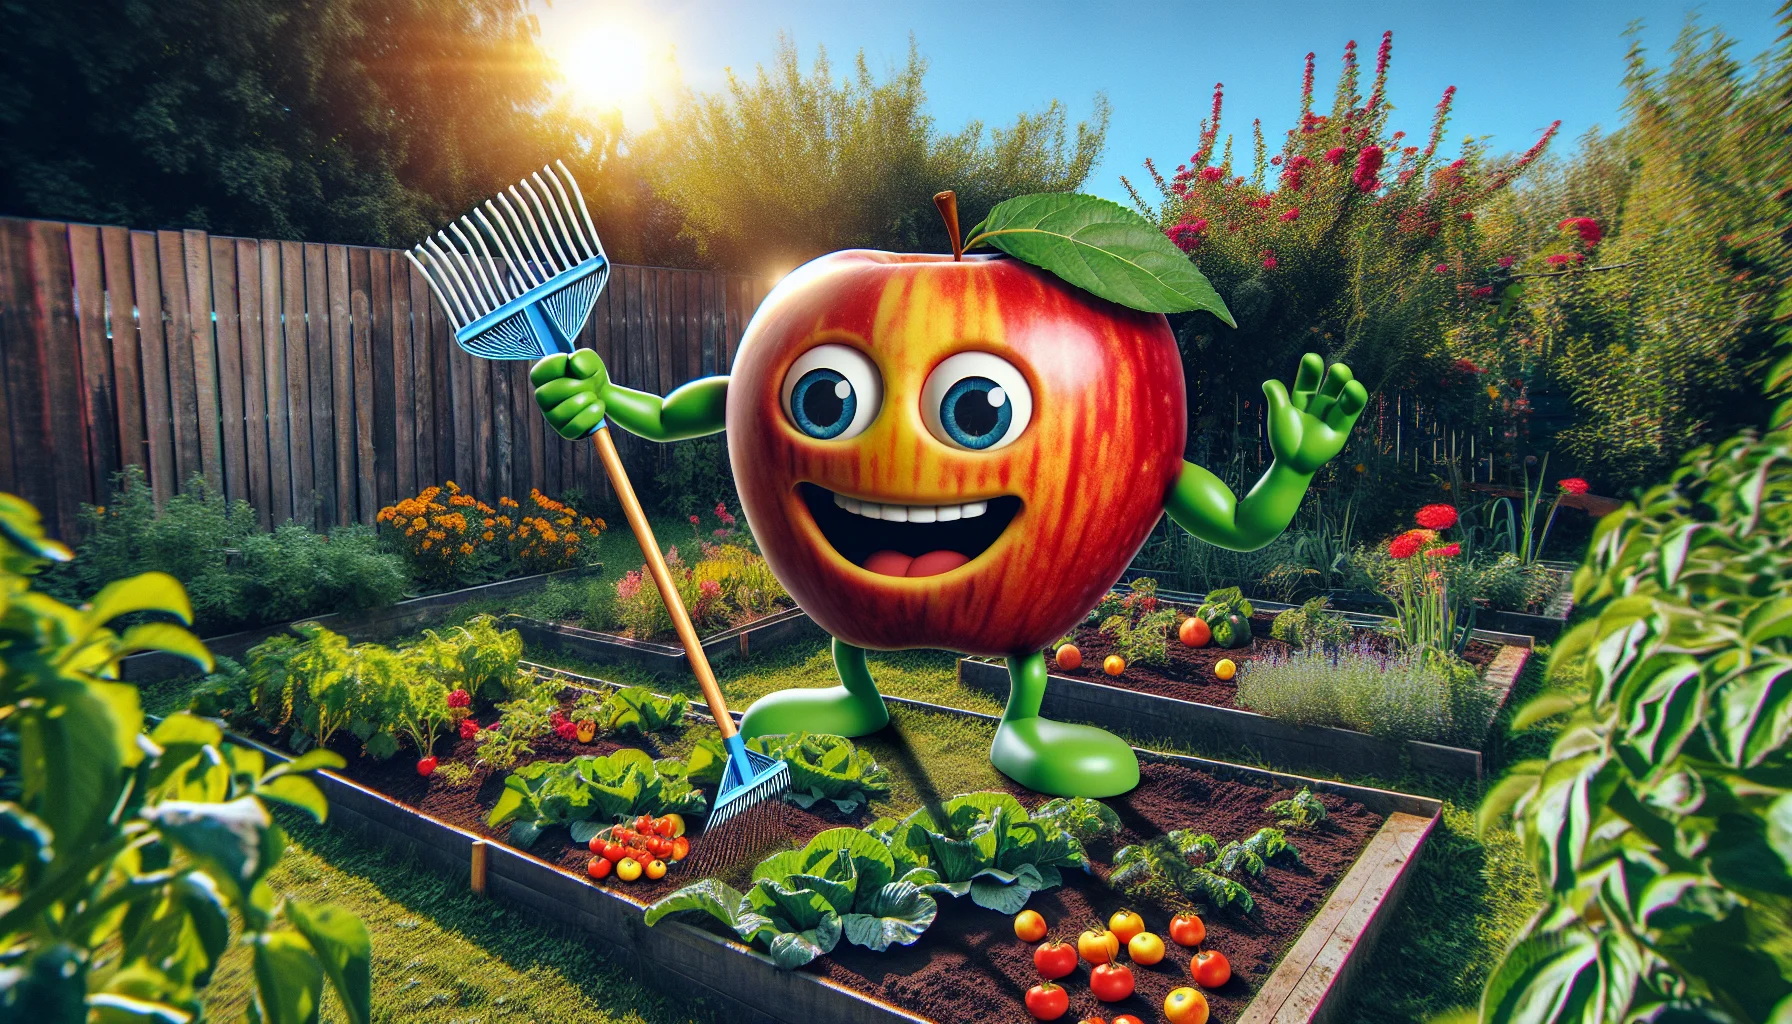 Generate a realistic image depicting a hilarious scene. An oversized, cartoonish, apple emoji has come to life and is positioned in the midst of a lush, healthy vegetable garden. It's wildly waving a garden rake, beckoning the viewers into its world of fun gardening. The background juxtaposes the animated apple emoji with a splay of colorful, ripening vegetables, blooming flowers, and the sun shining brightly overhead, casting a warm glow over the garden. The playful and vibrant nature of this image is supposed to entice viewers into the joys of gardening.